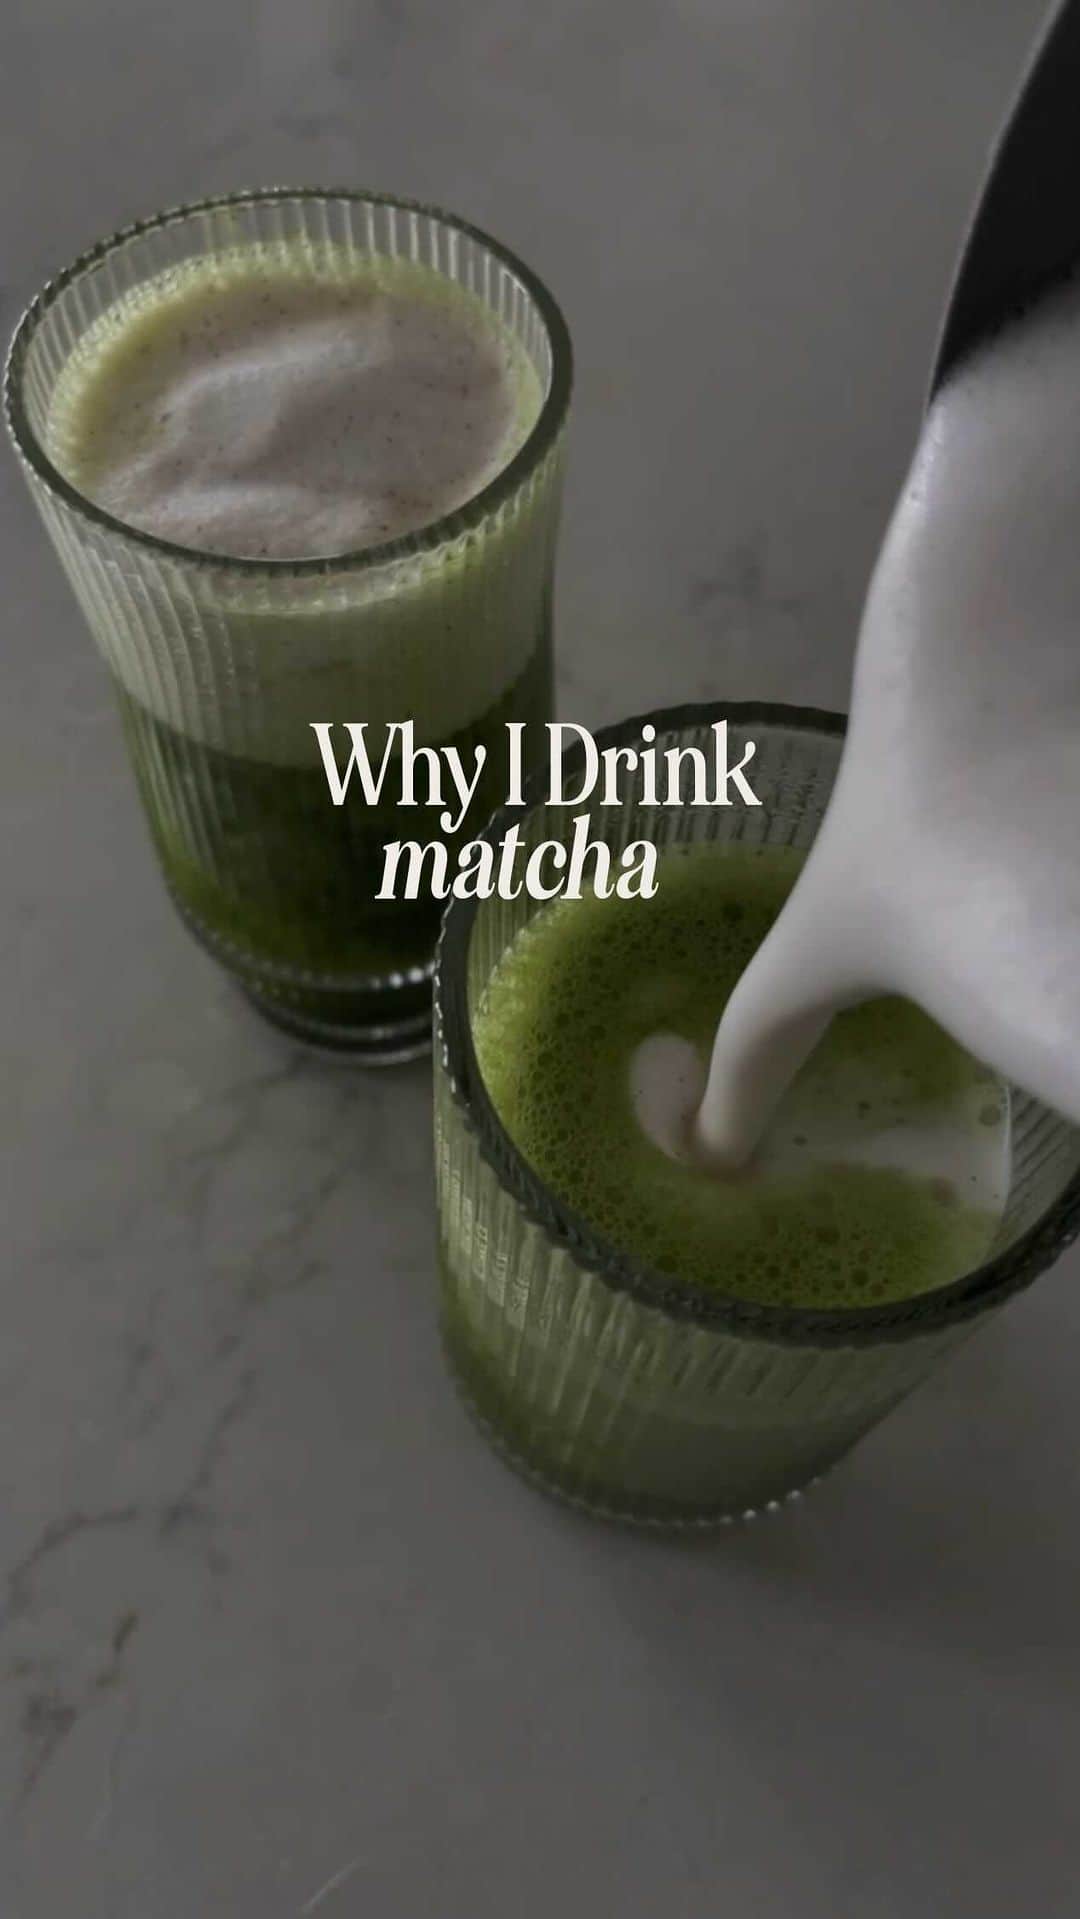 Stephanie Sterjovskiのインスタグラム：「Matcha has become super “trendy” but this healing drink has been around for over a thousand years. I love sipping on a cup after lunch because it activates thermogenesis to digest food, gives me a boost in that afternoon slump (without the crash) and helps increase my focus. Not to mention matcha is powerful for (but not limited to): 🍵 Antioxidants 🍵 Breast Health 🍵 Glowing Skin 🍵 Phytonutrients & more! Always get organic, ceremonial-grade matcha for the full benefits. I love @piquelife because their matcha is quadruple toxin screened and come in these handy individual packets that make it easy to take with you on the go. 💚 #matchabenefits #matchalatte #holistichealth #hormonehealth #hormonehealing」